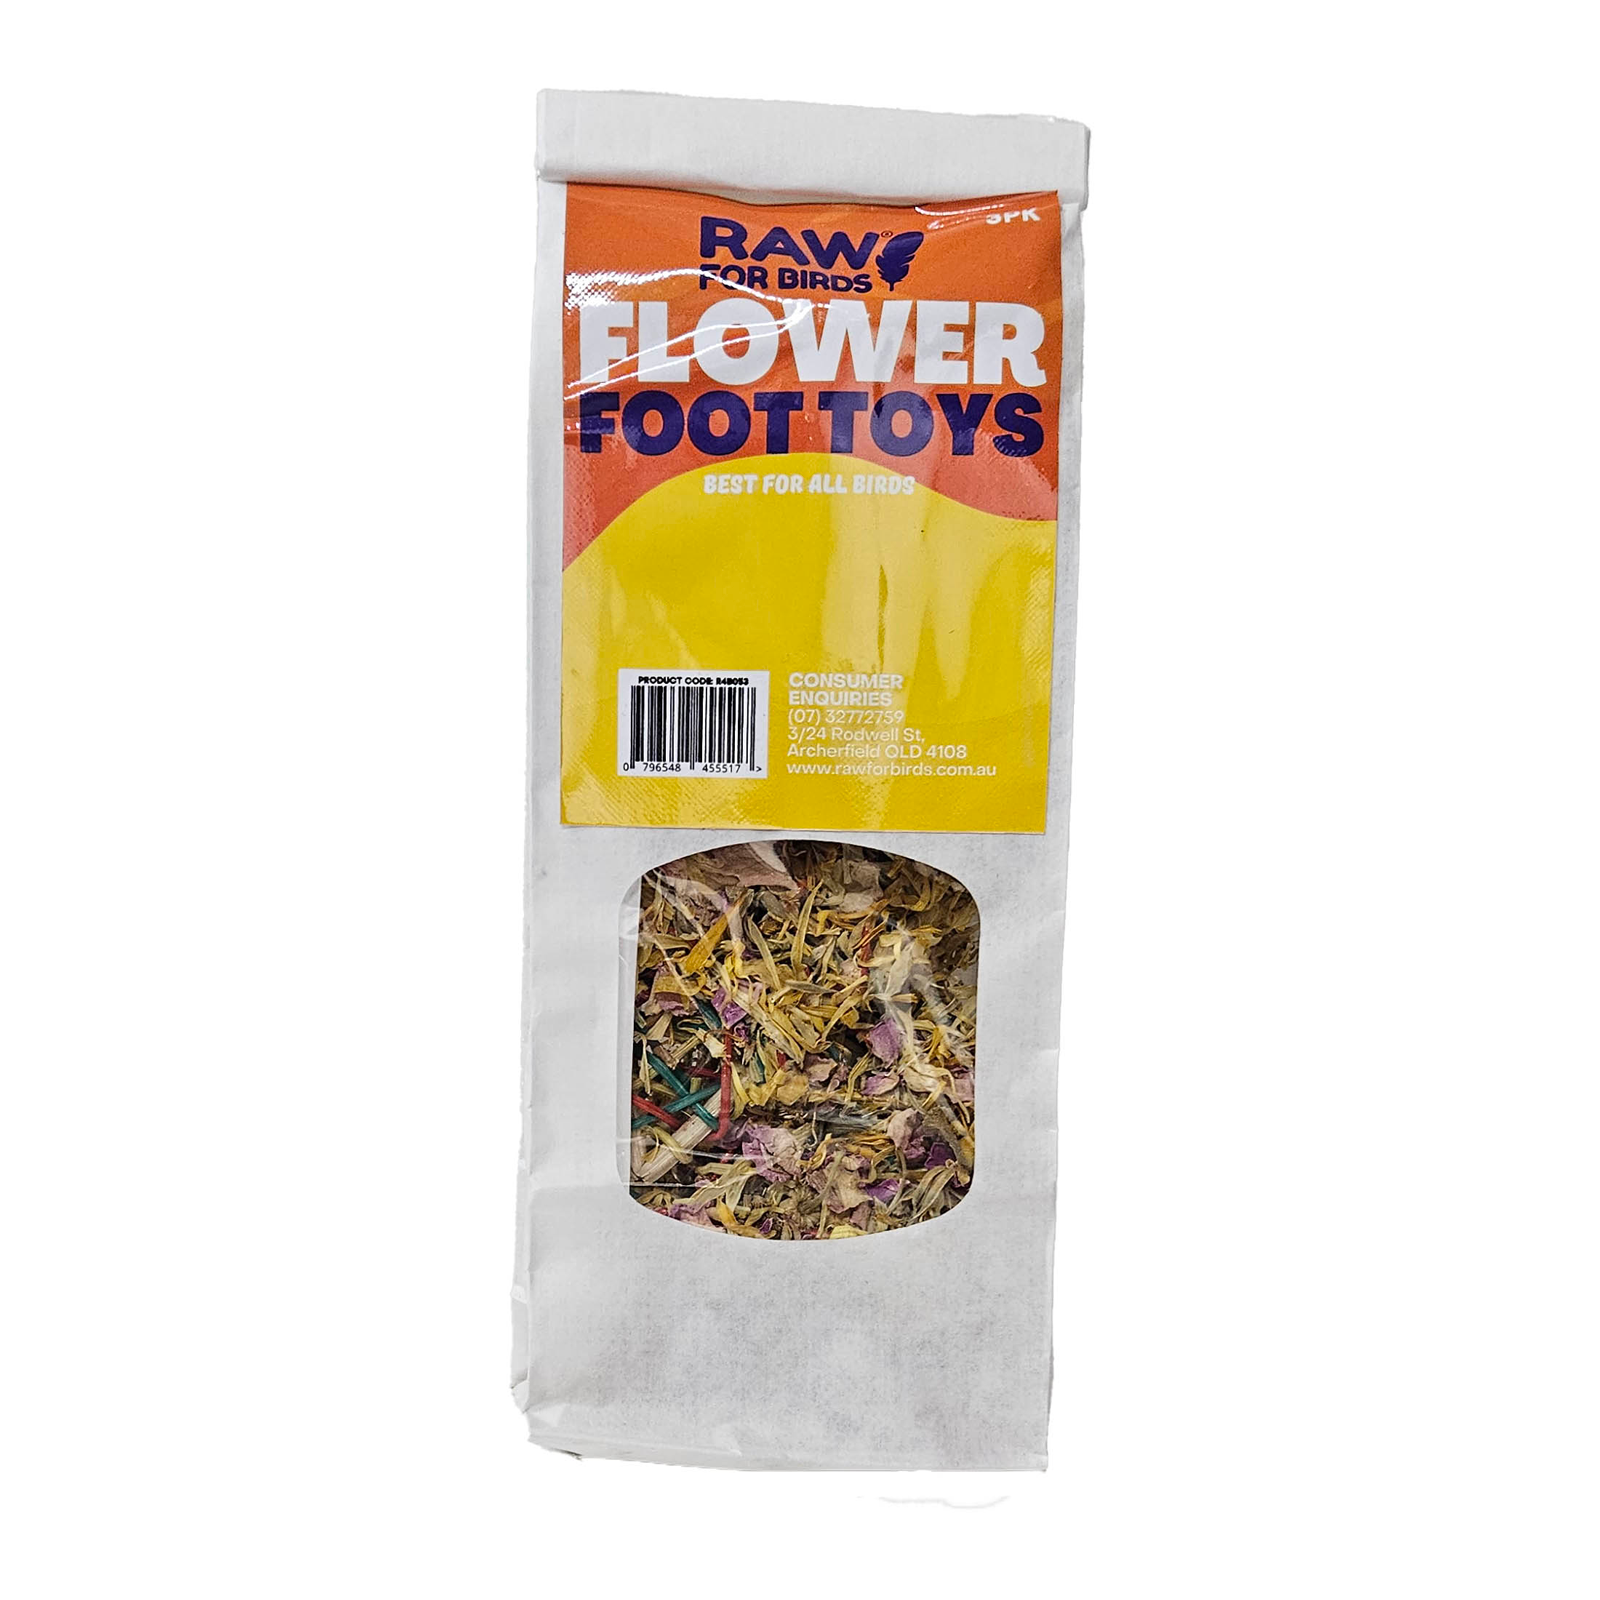 Raw for Birds Flower Foot Toys